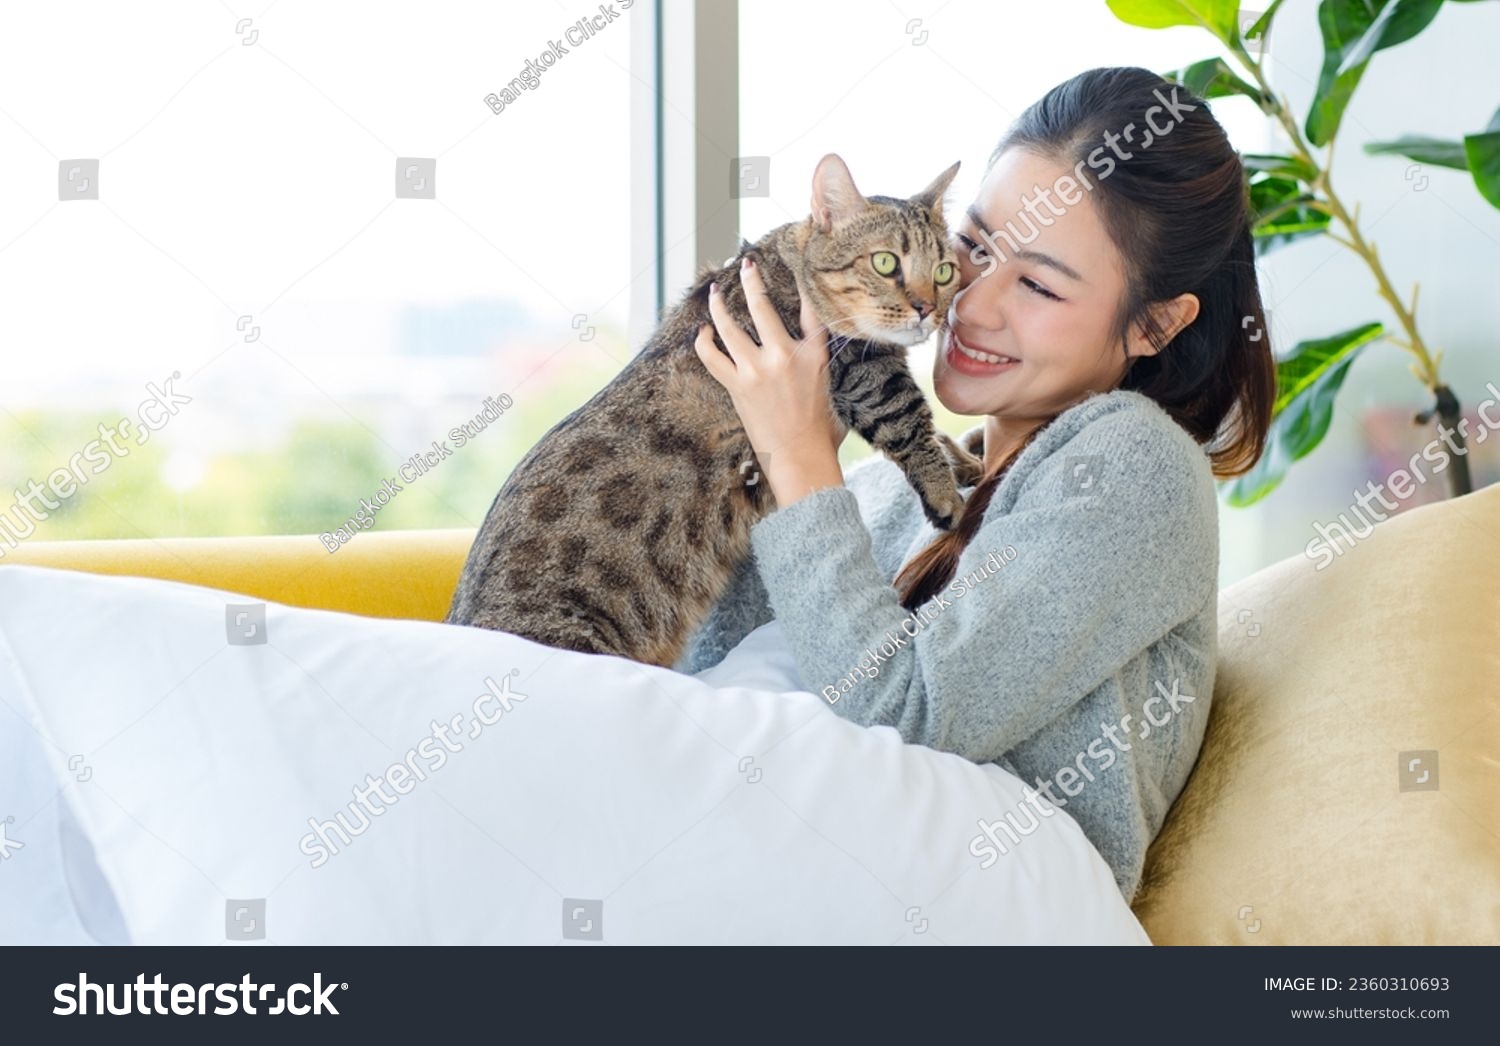 Asian young pretty cheerful female girl in sweater laying lying down with pillows on cozy sofa couch smiling look at camera holding little cute domestic short hair tabby companion pet cat. #2360310693